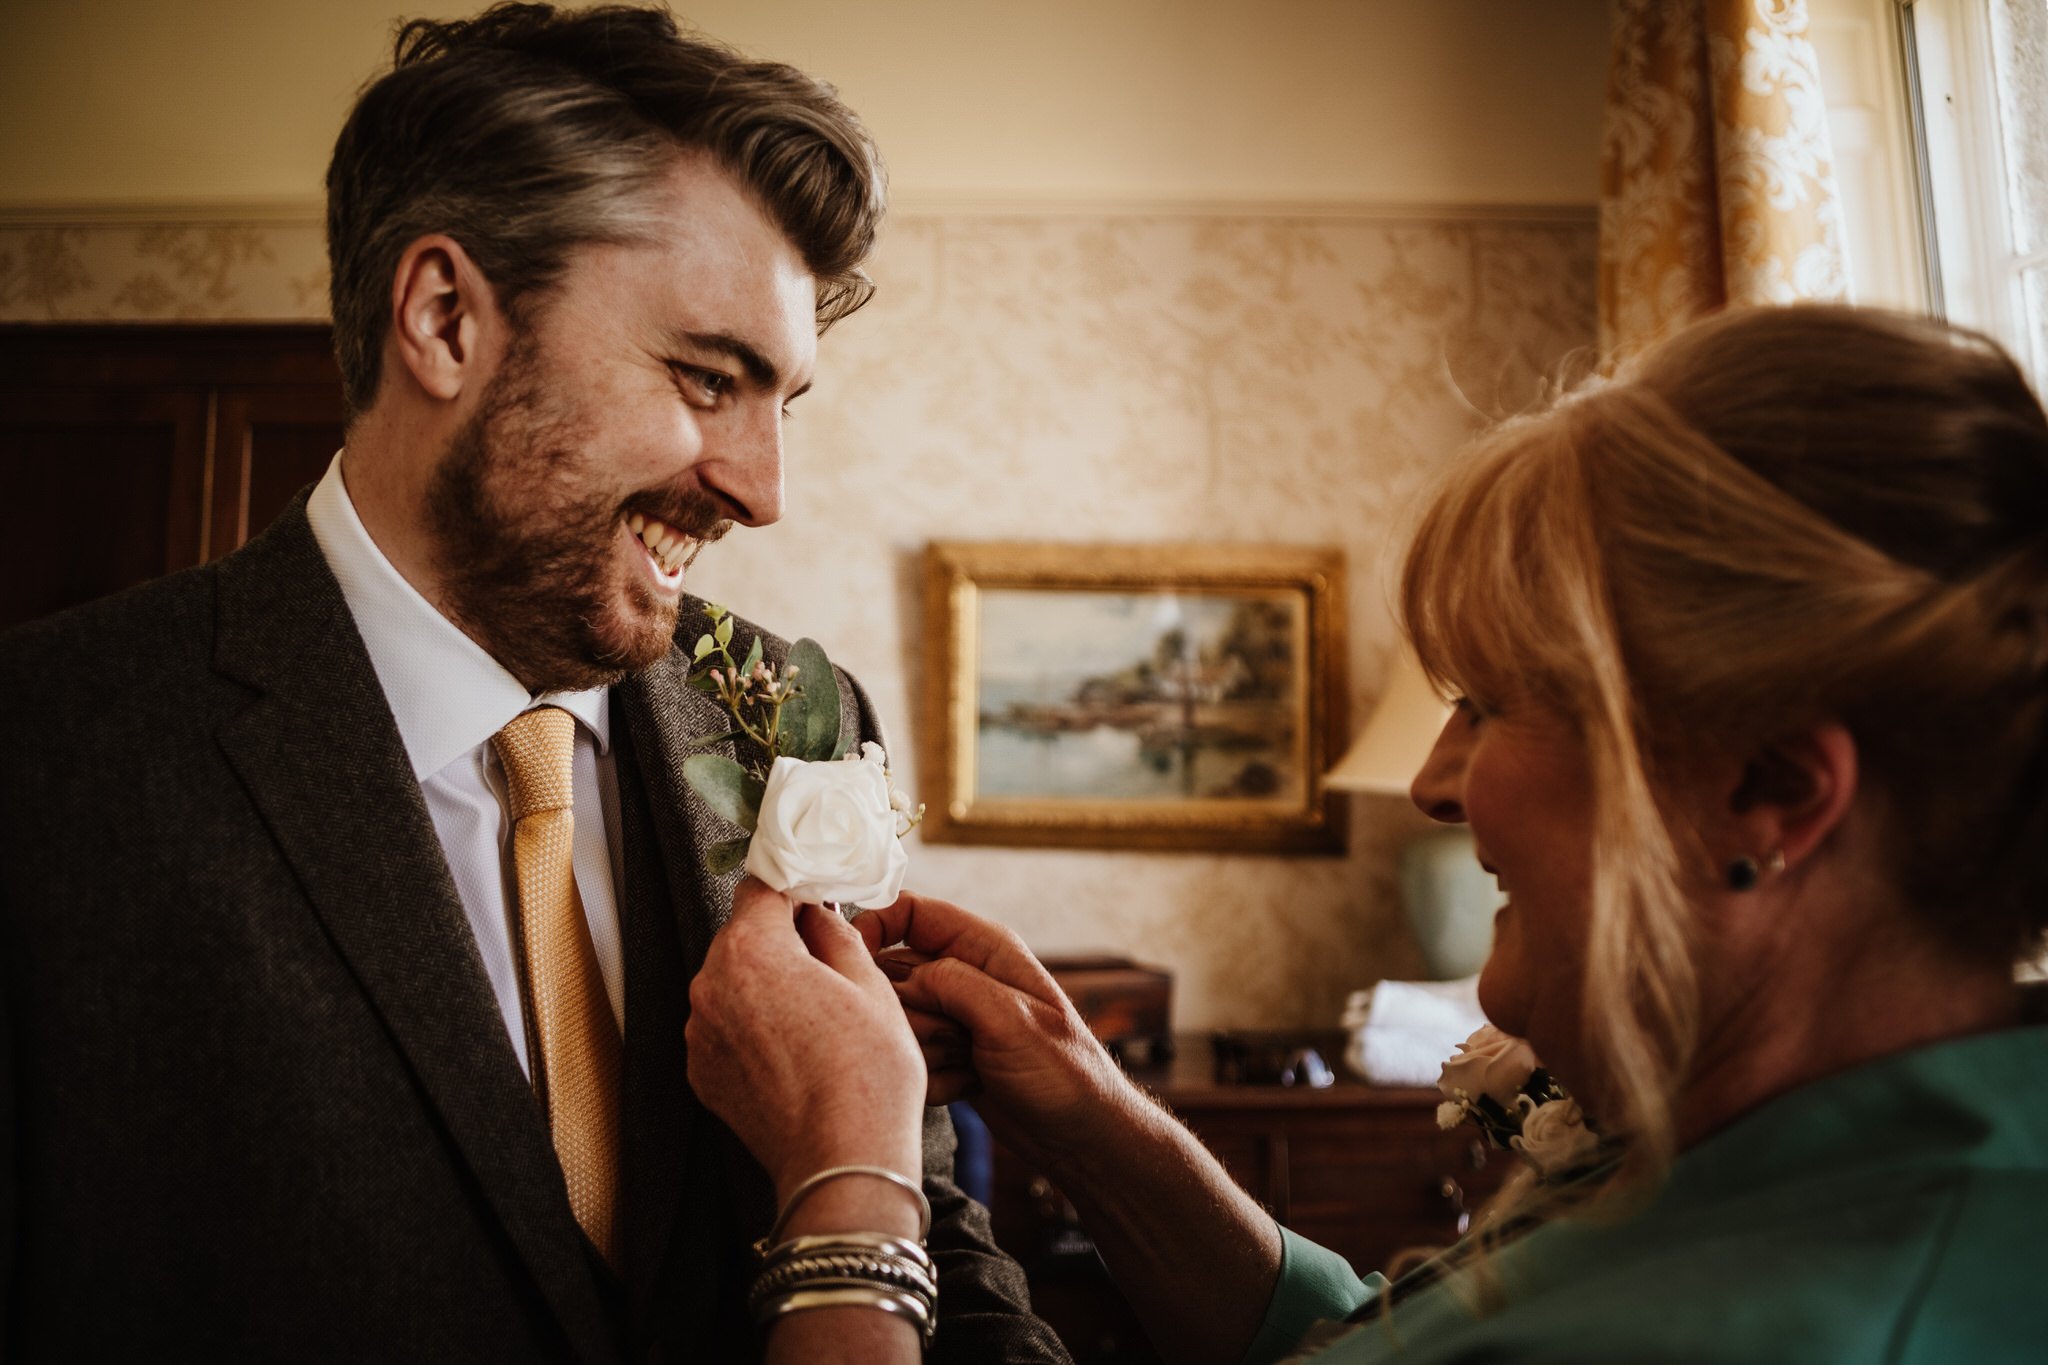 Mother of the groom puts on a buttonhole